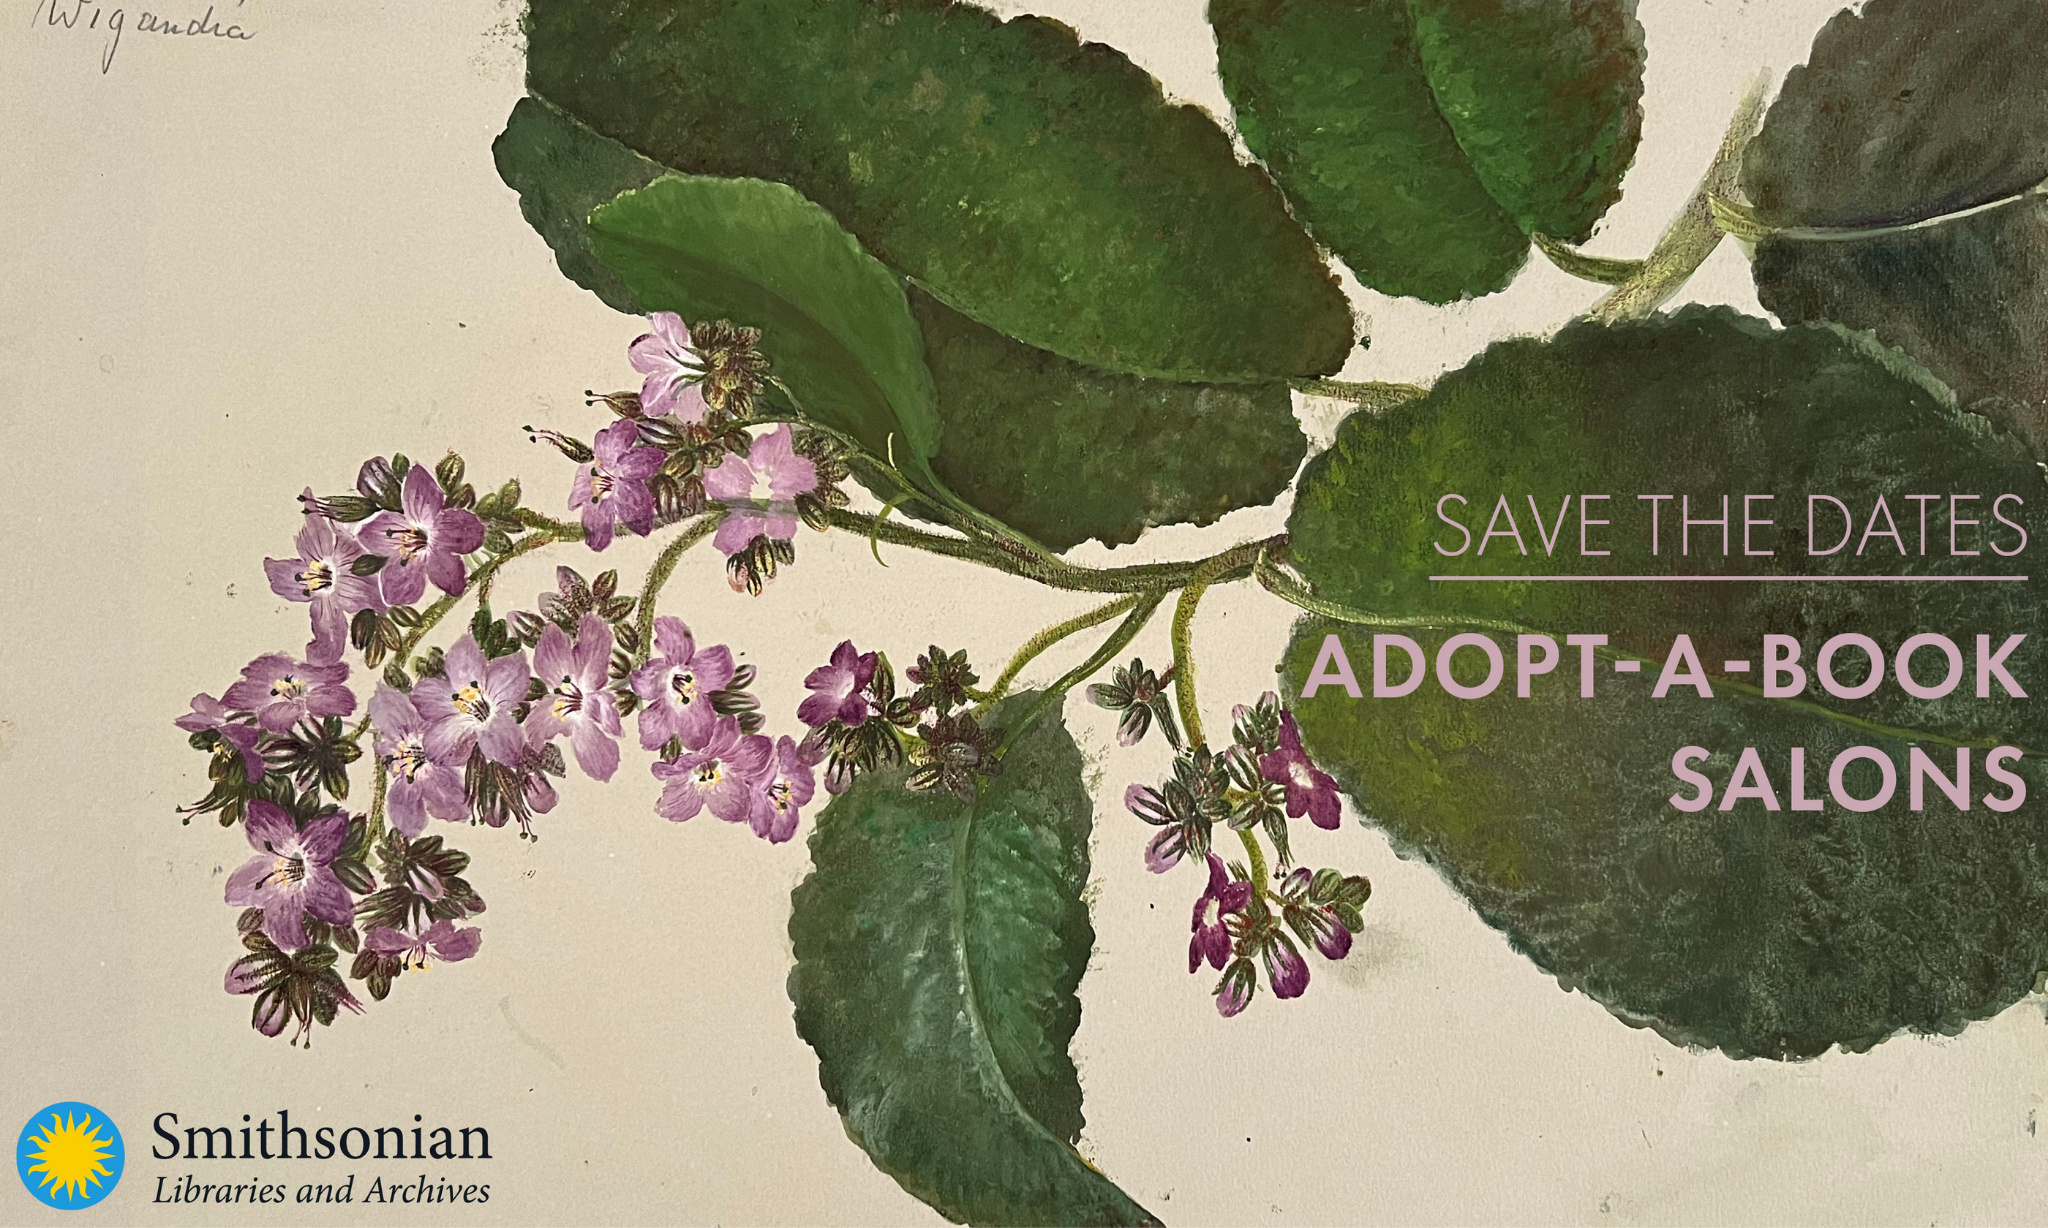 Join Us for Adopt-A-Book Events in April